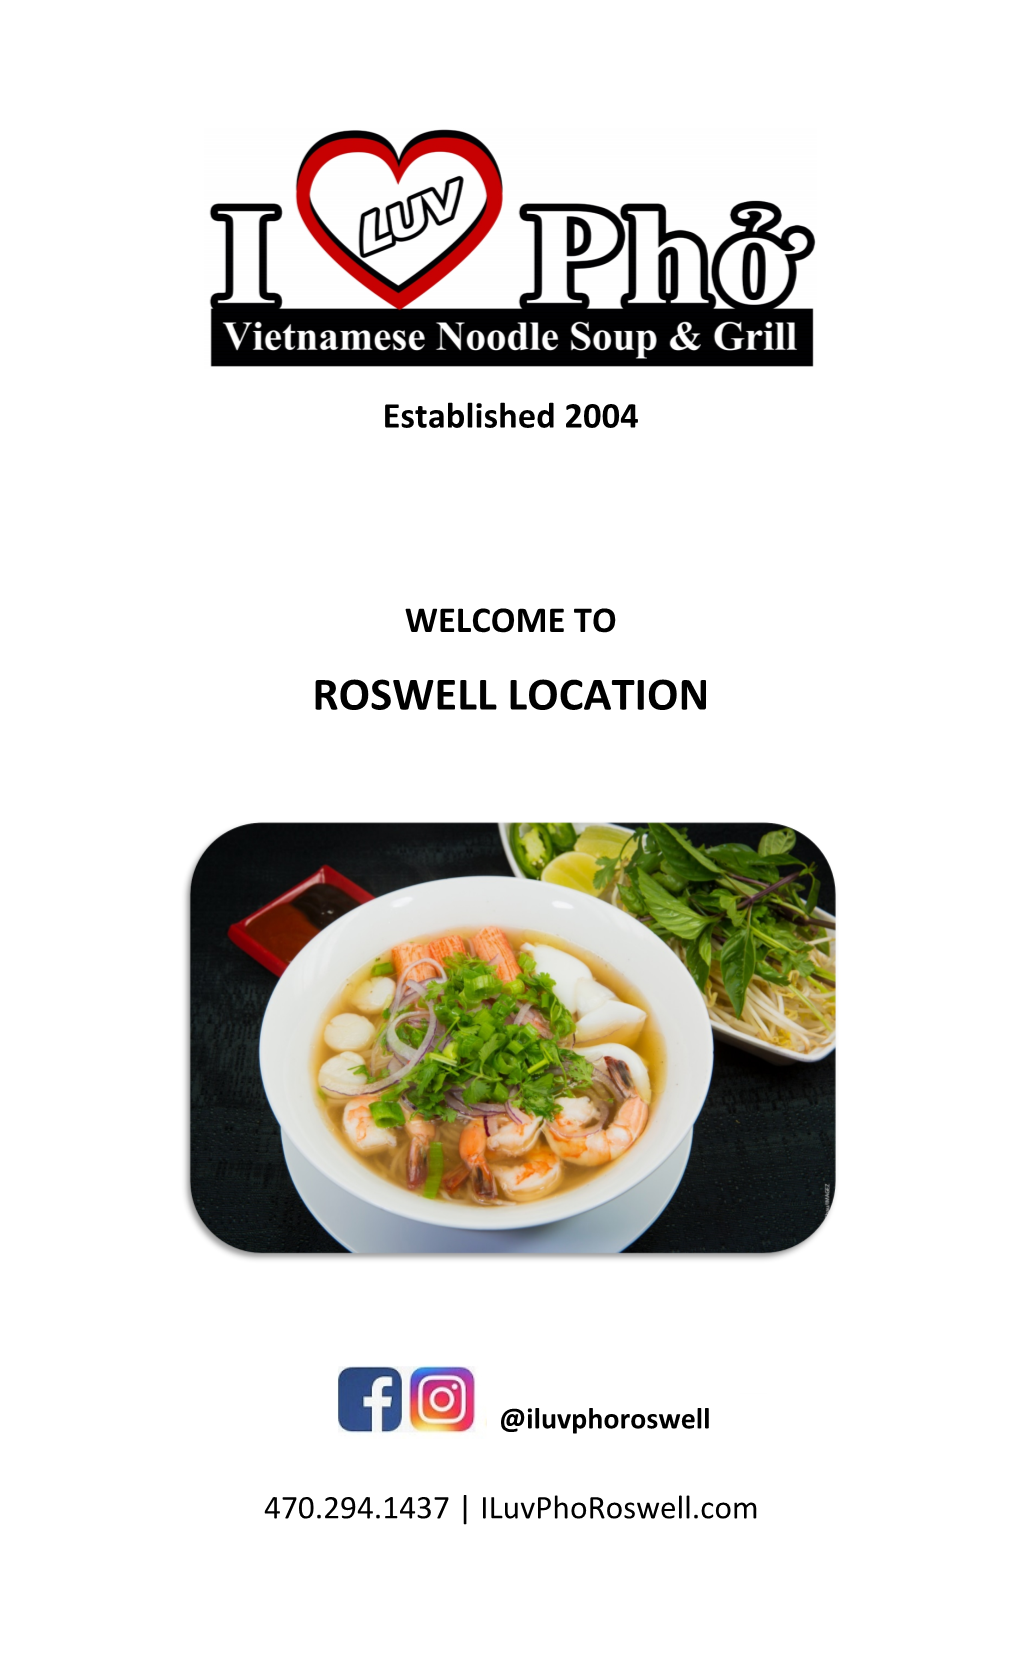 Roswell Location